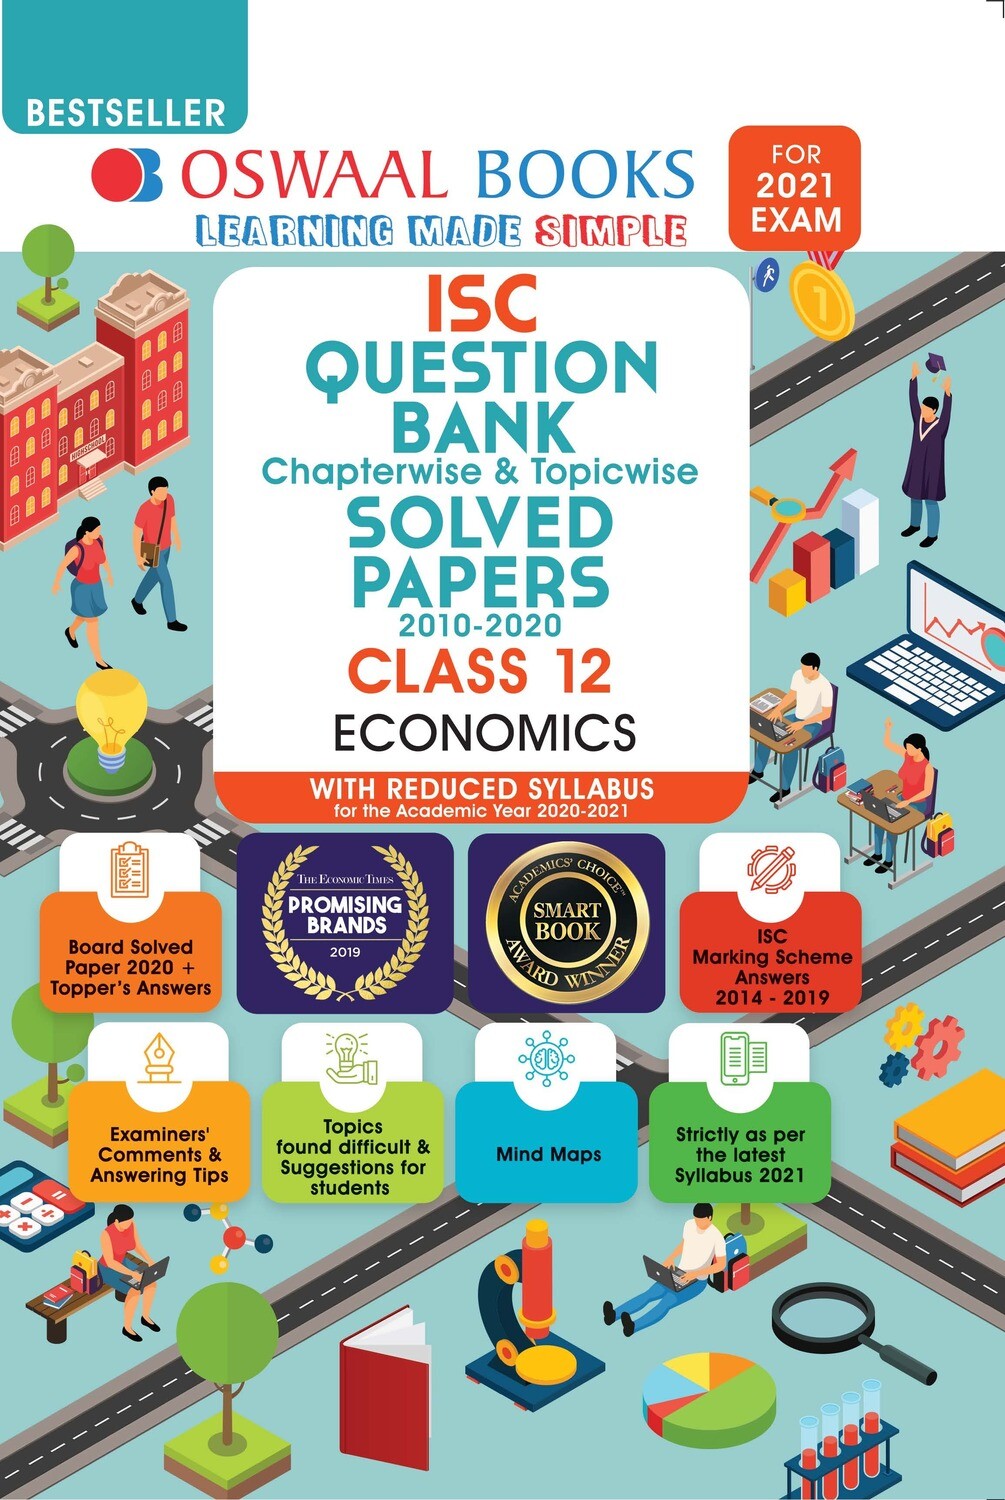 Buy e-book: Oswaal ISC Question Bank Chapterwise & Topicwise Solved Papers, Economics, Class 12 (Reduced Syllabu